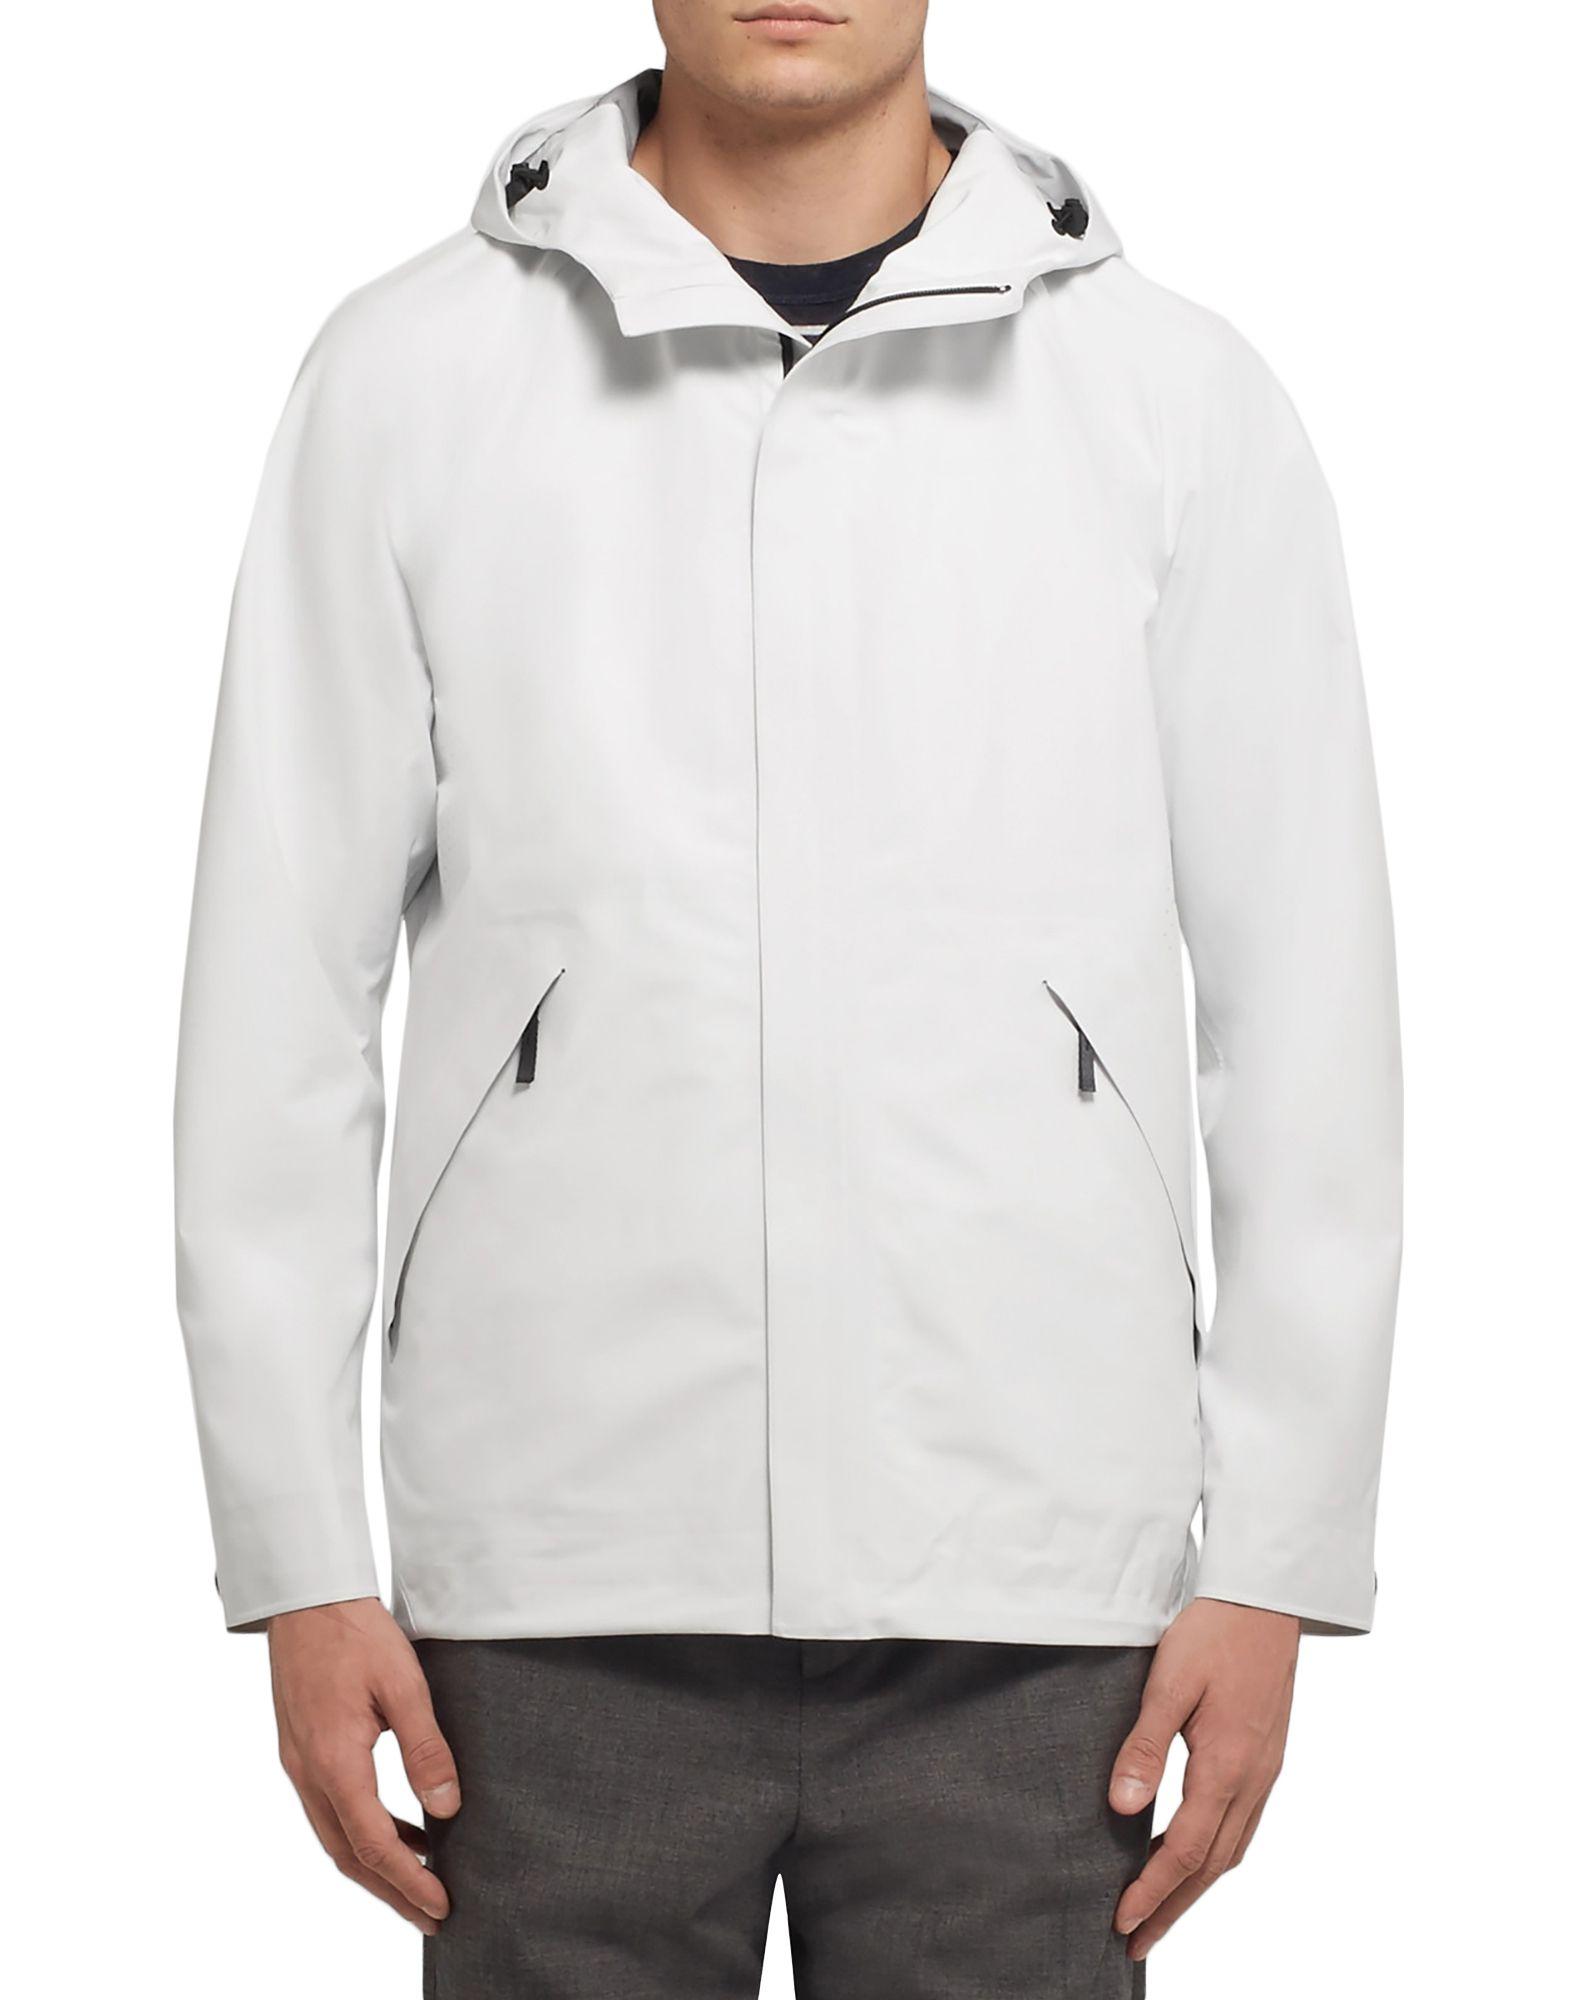 Theory Jacket in White for Men - Lyst